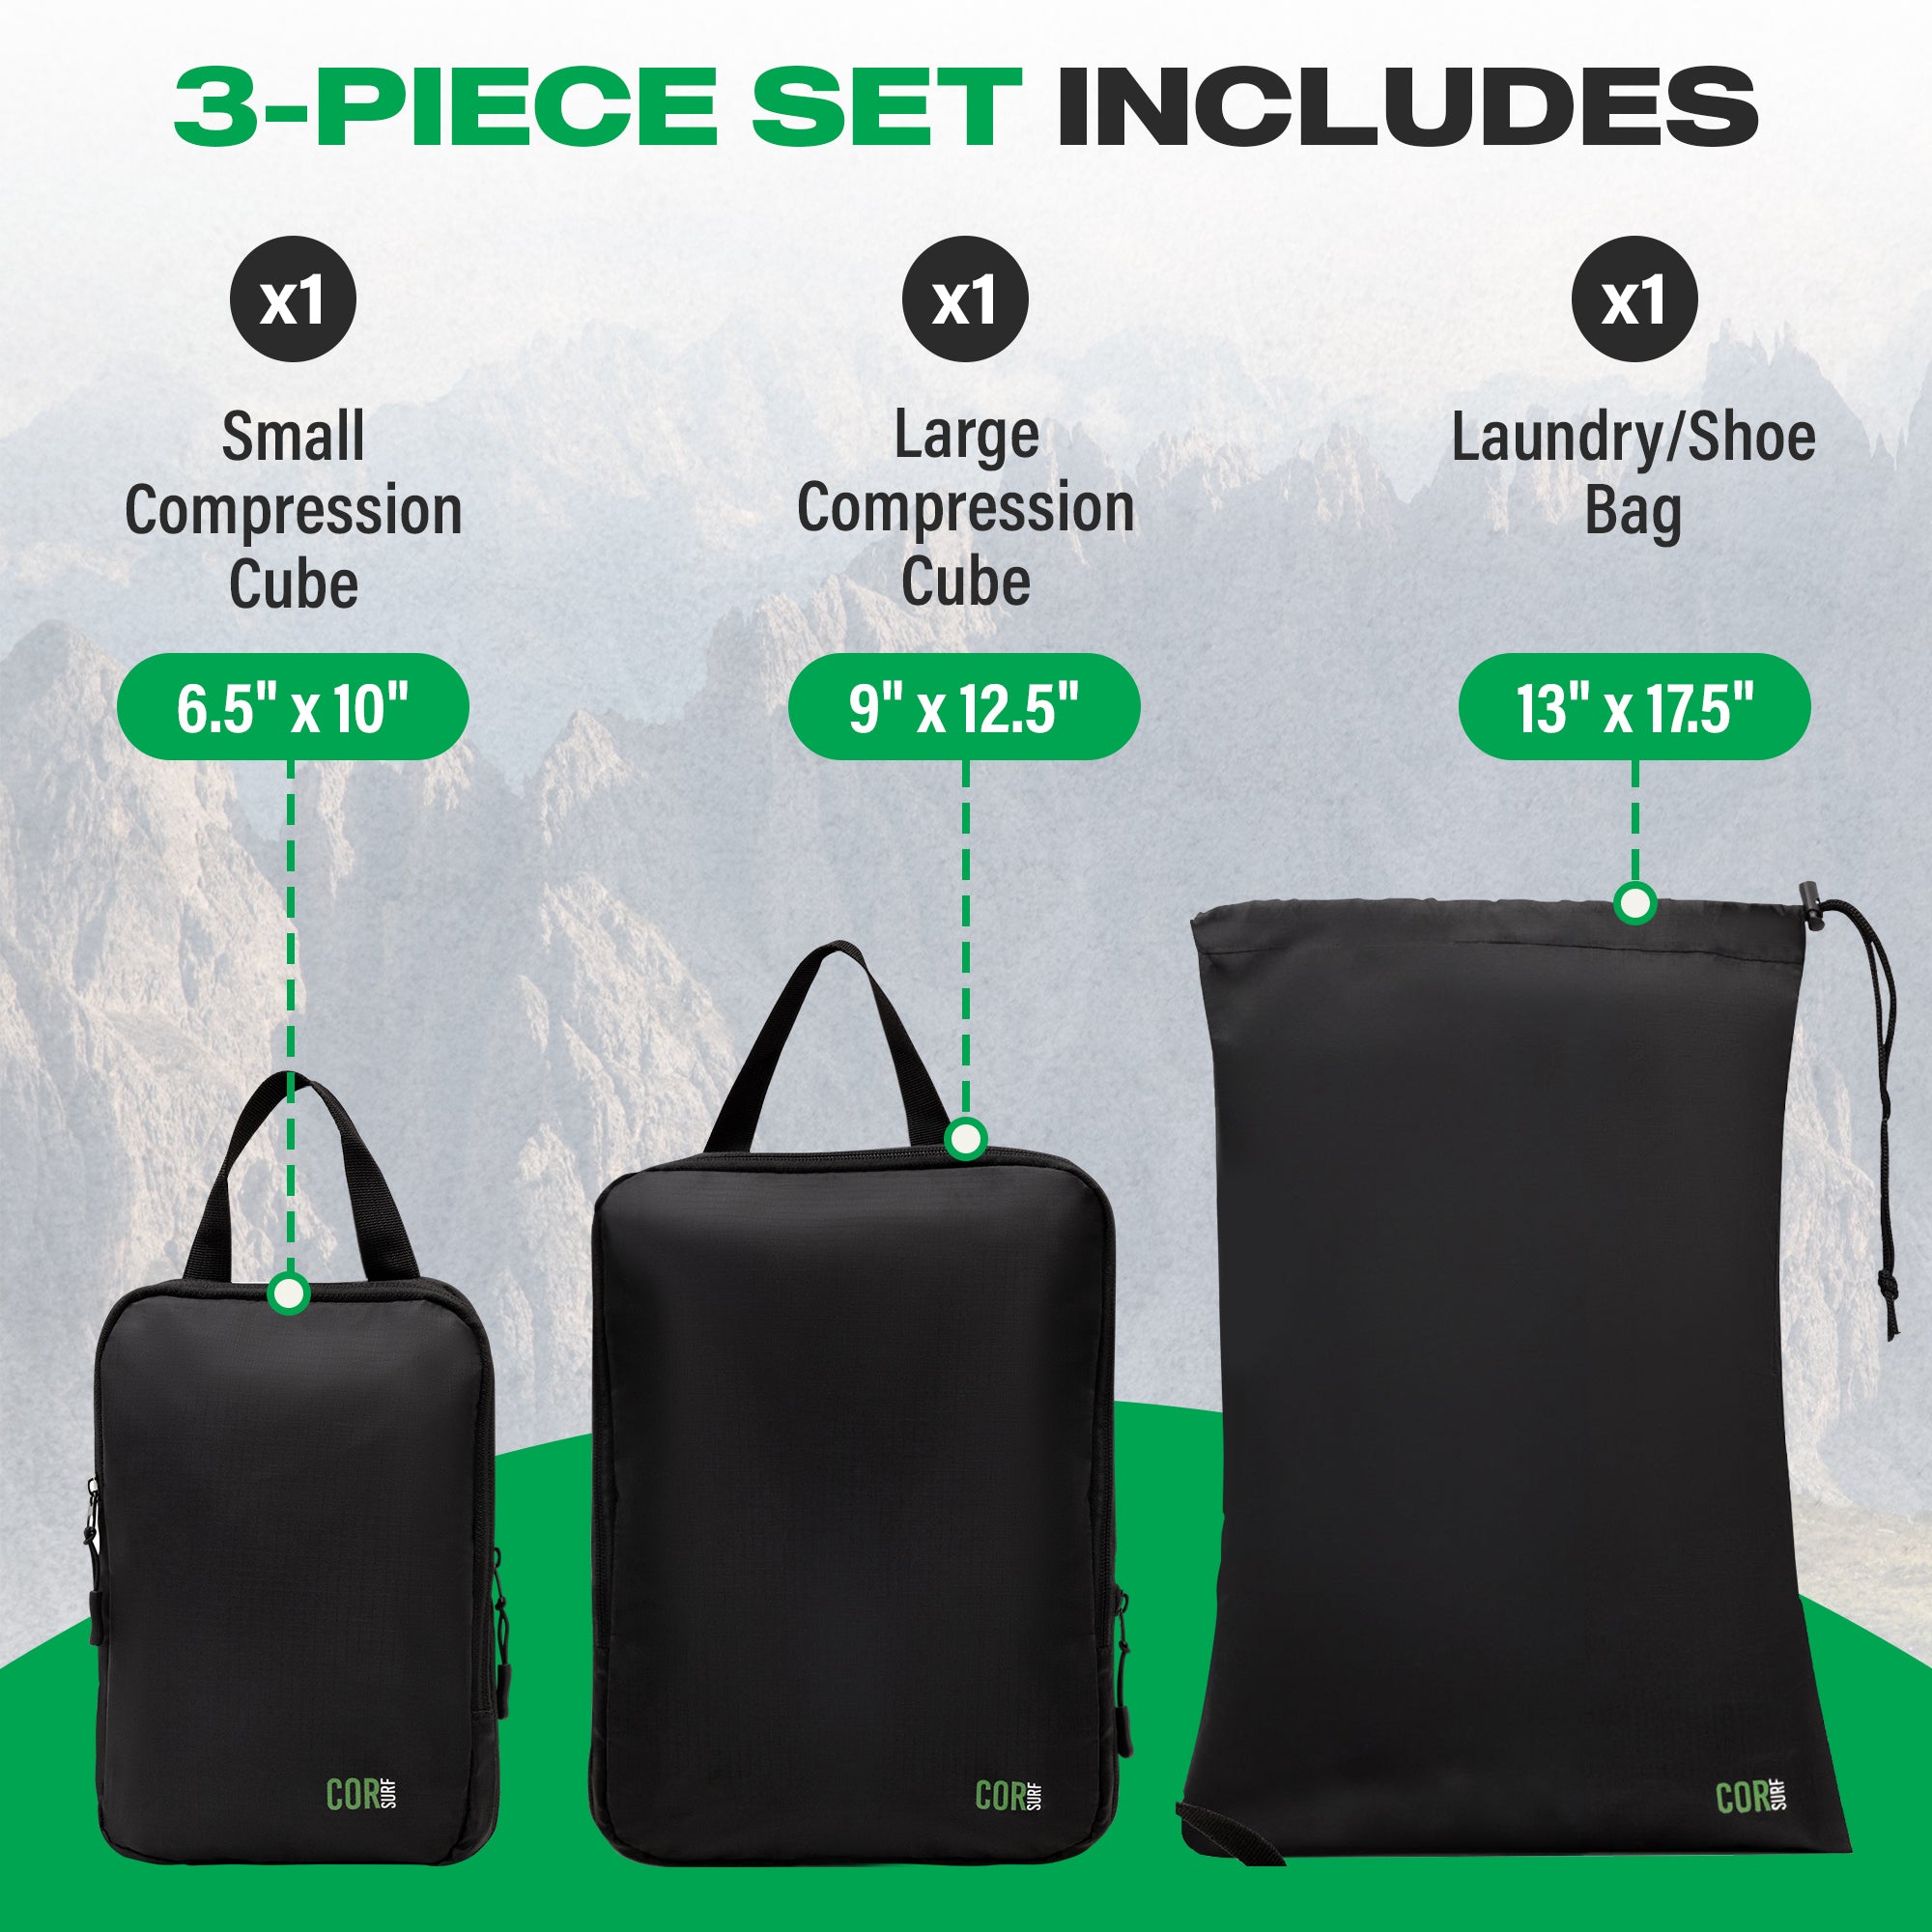 what comes with the compression packing cube 3-piece set for travel